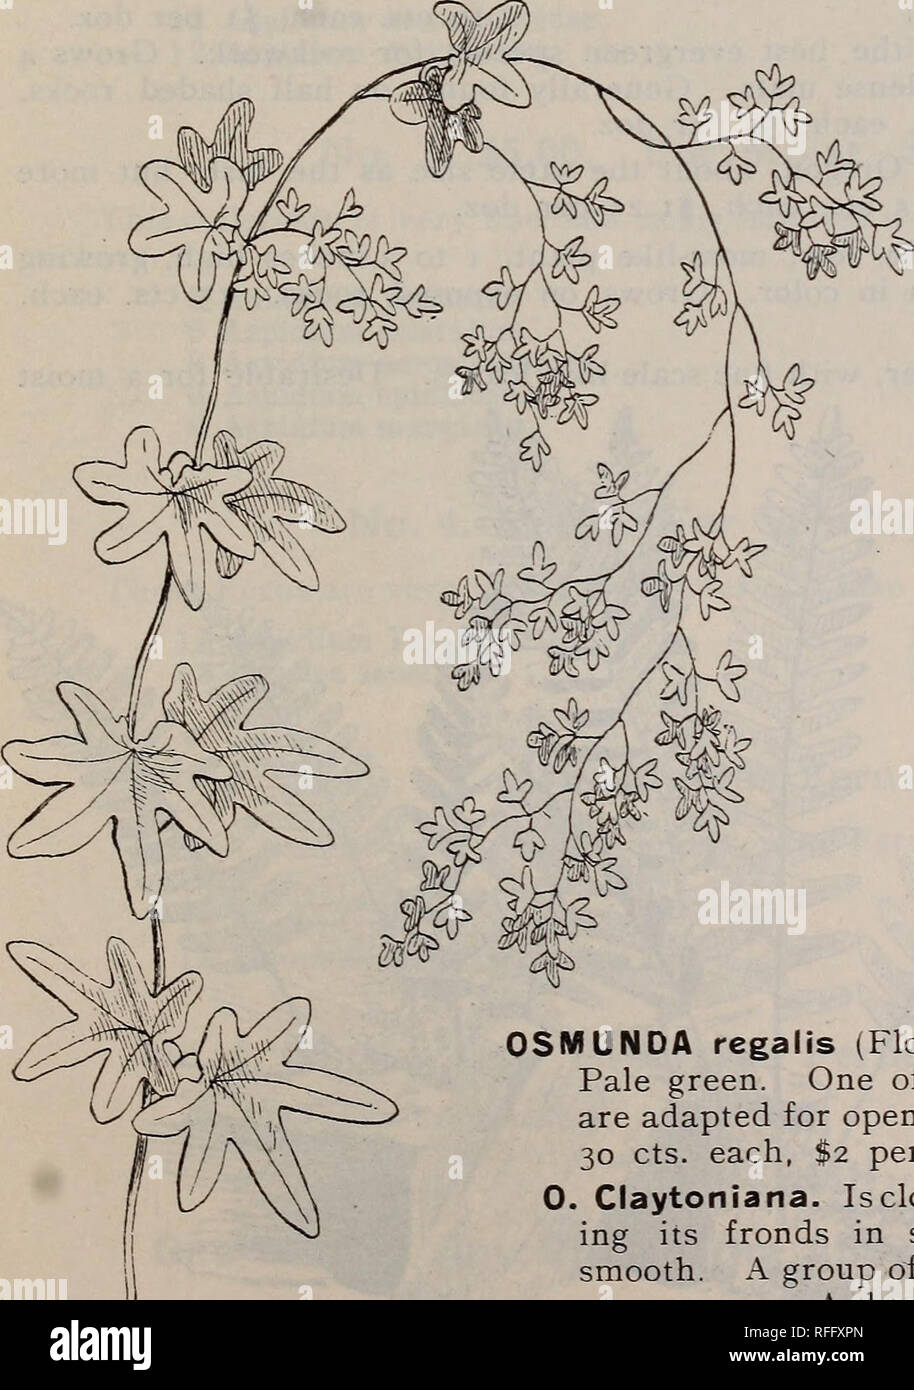 . Hardy ferns &amp; flowers, shrubs, roses, etc.. Nursery stock Massachusetts Catalogs; Ferns Catalogs; Perennials Catalogs; Shrubs Catalogs; Roses Catalogs; Plants, Ornamental Catalogs. IHcksonia piinctilobula.. Lygodium pa J in at tun. 4 inch long, growing thickly along the stalk. Moist soil. 20 cts. each, $1.25 per doz. LYGODIUM palmatum (Climb- ing Fern). Grows 1 to 3 feet high. Stalk slender and twin- ing, from a slender running root-stock. 25 cts, ONOCLEA sensibilis (Sensitive Fern). 1 to 2 feet high. Wet places, open sun or shade. 10 cts., each, $1 per doz. 0. Struthiopteris (Ostrich Fe Stock Photo